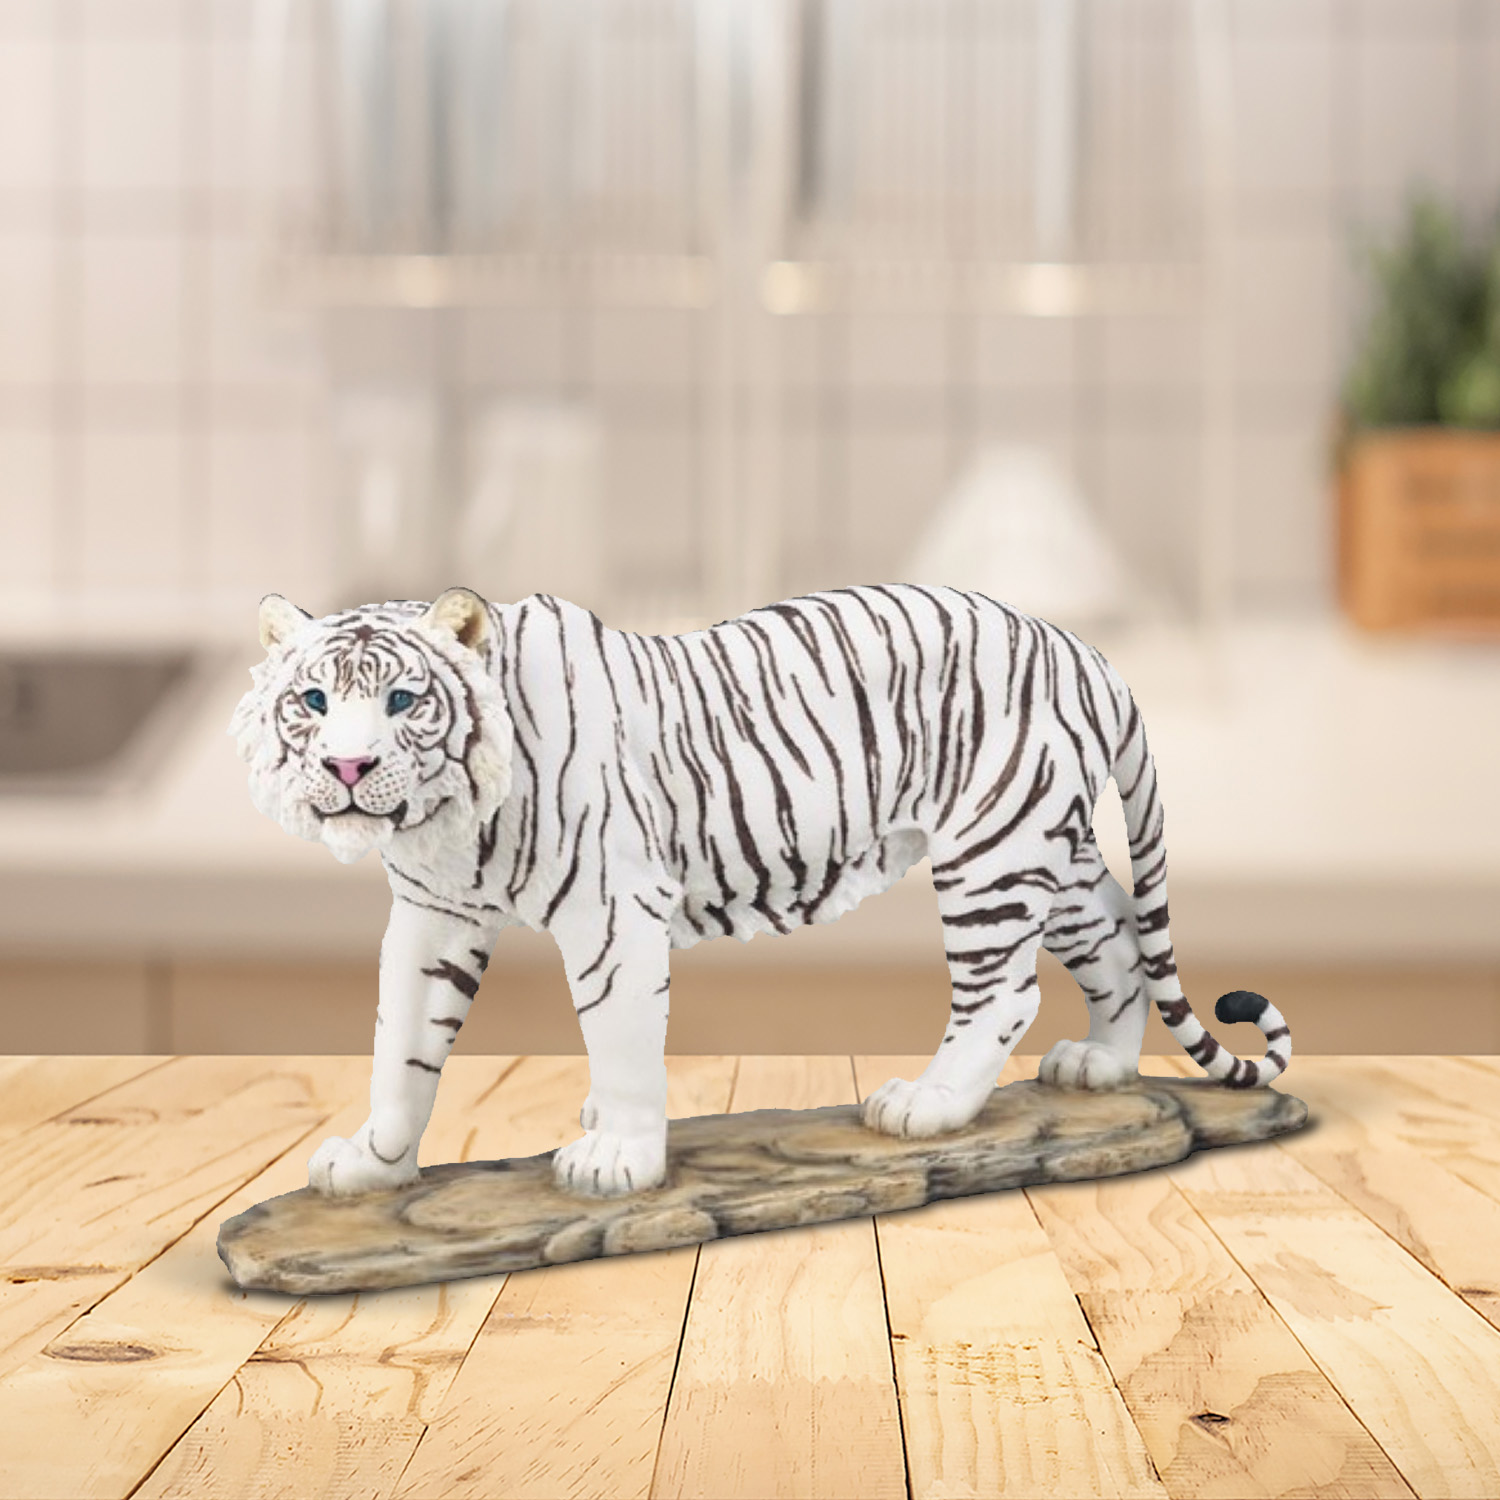 

6"h White Tiger Figurine Statue Home/room Decor And Perfect Gift Ideas For House Warming, Holidays And Birthdays Great Collectible Addition